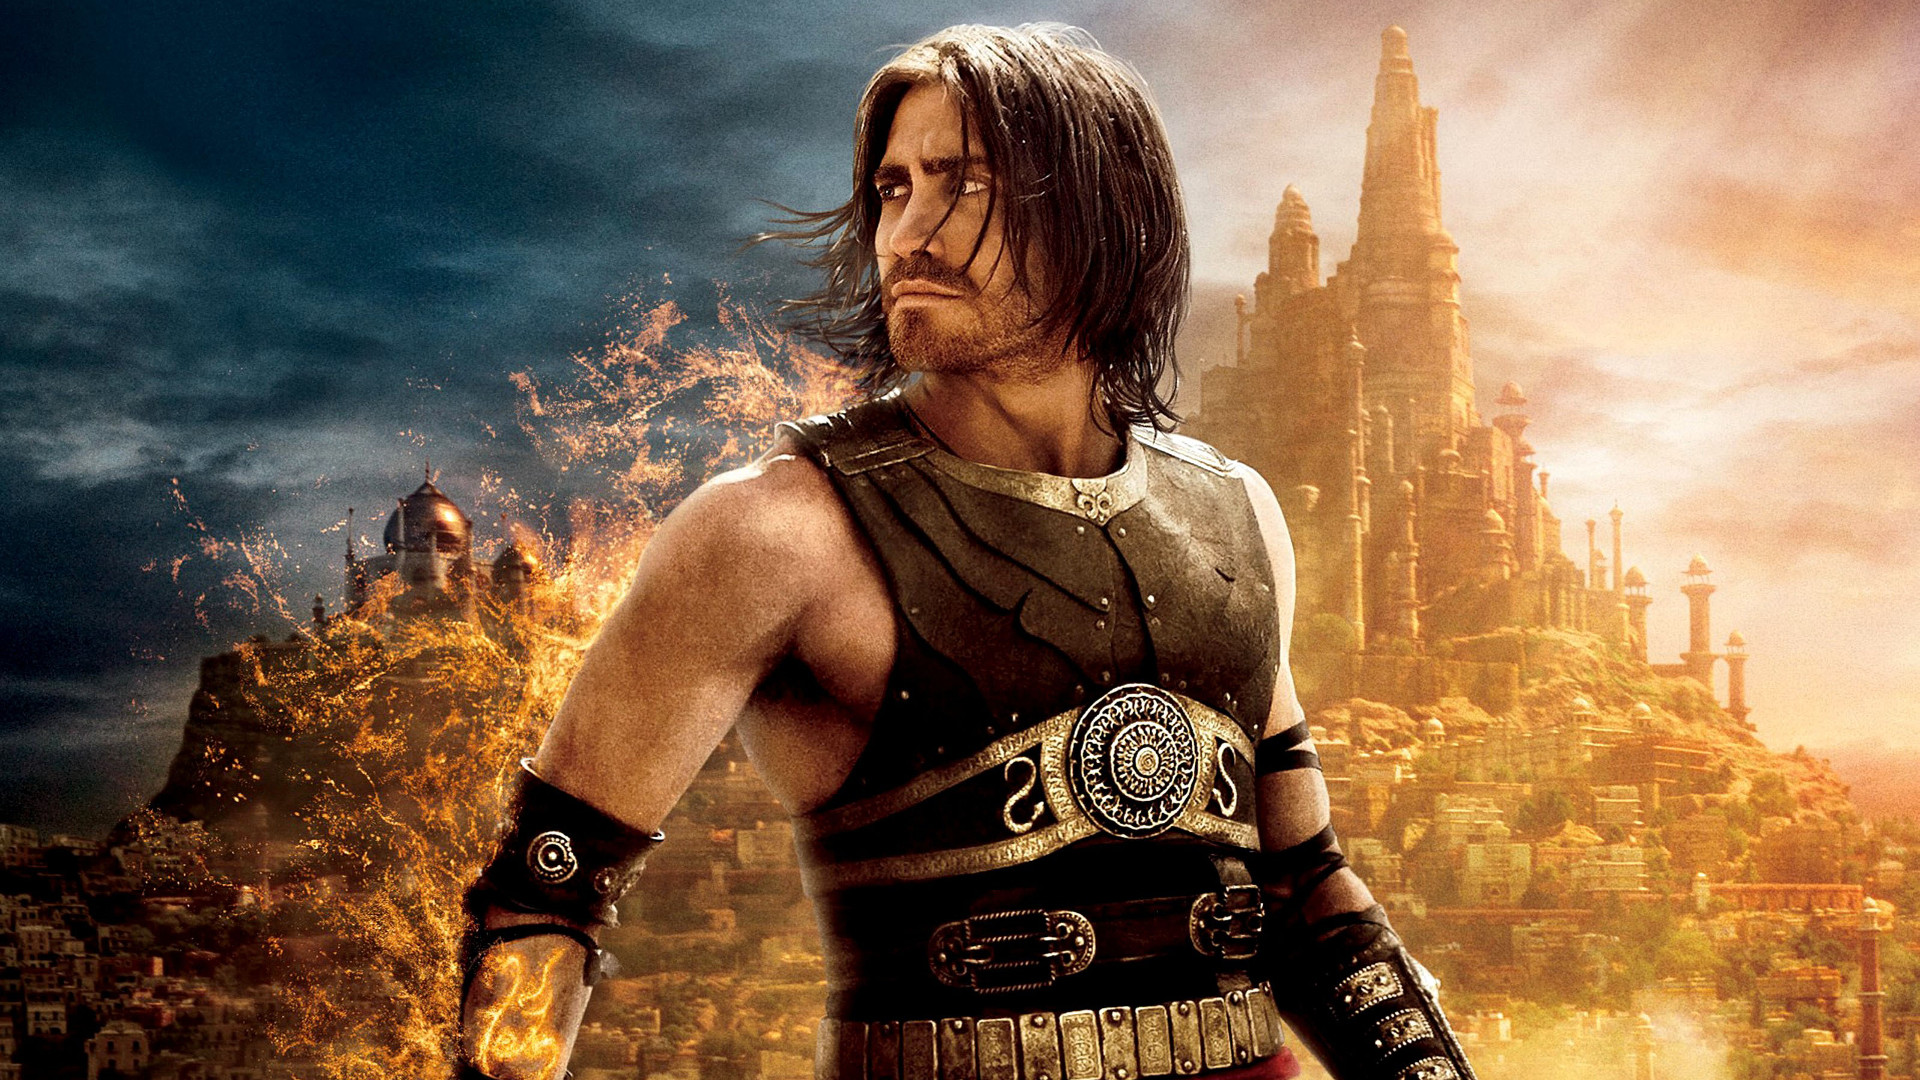 Wallpaper Prince of Persia: The Sands of Time, 2010 movie, Jake Gyllenhaal, actor